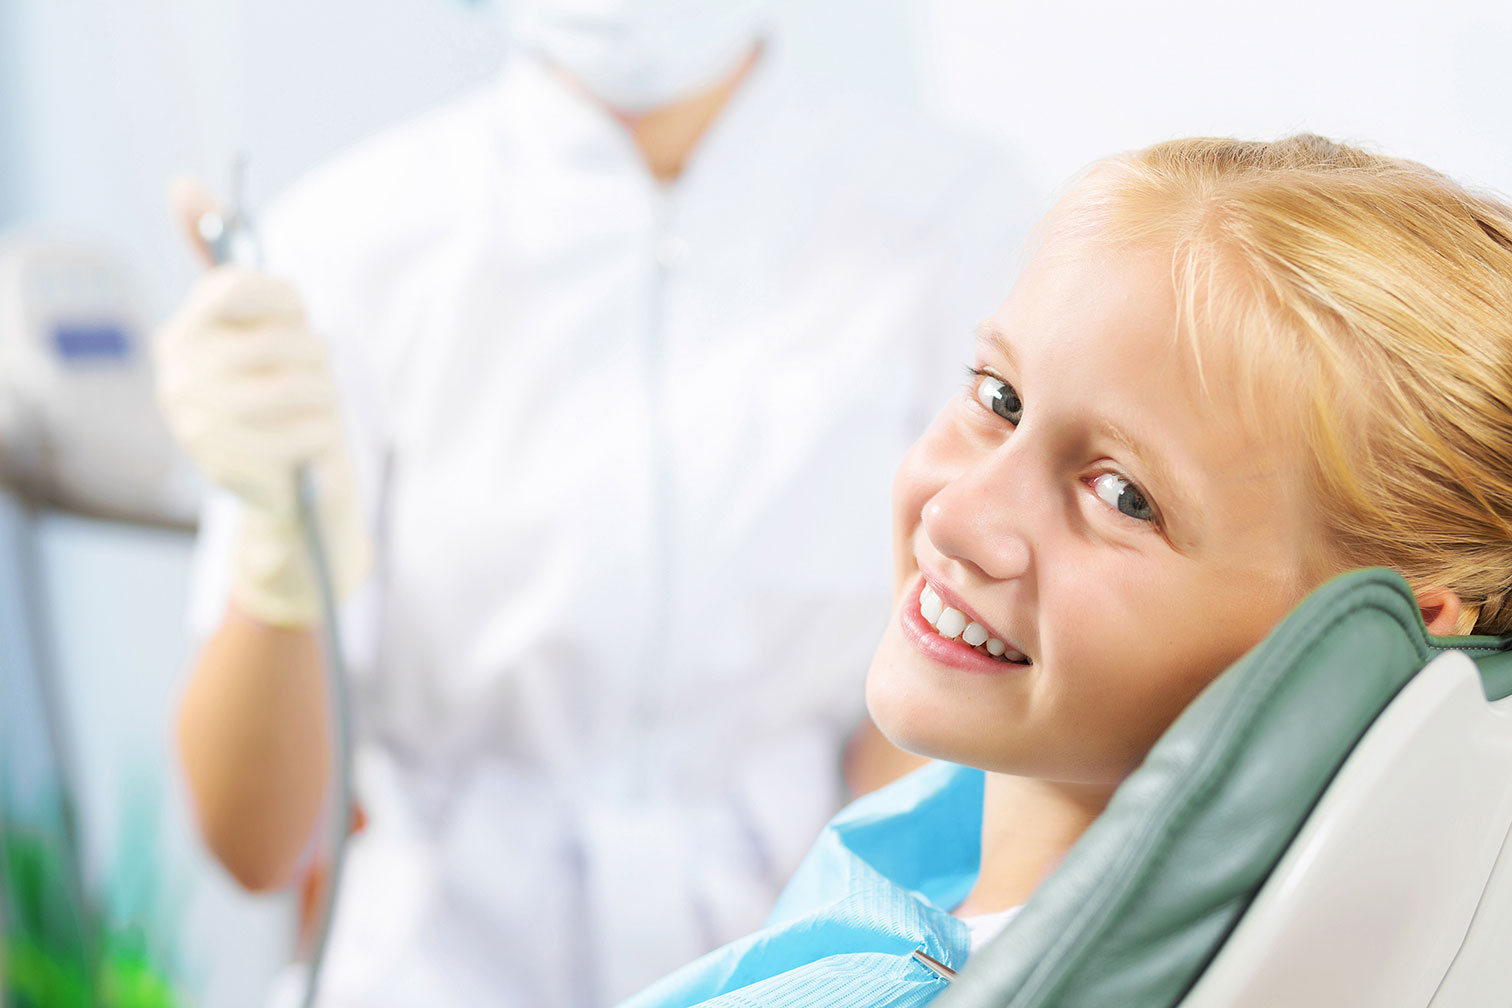 10 Year Old Blond Girl in Dental Exam Chair Smiling